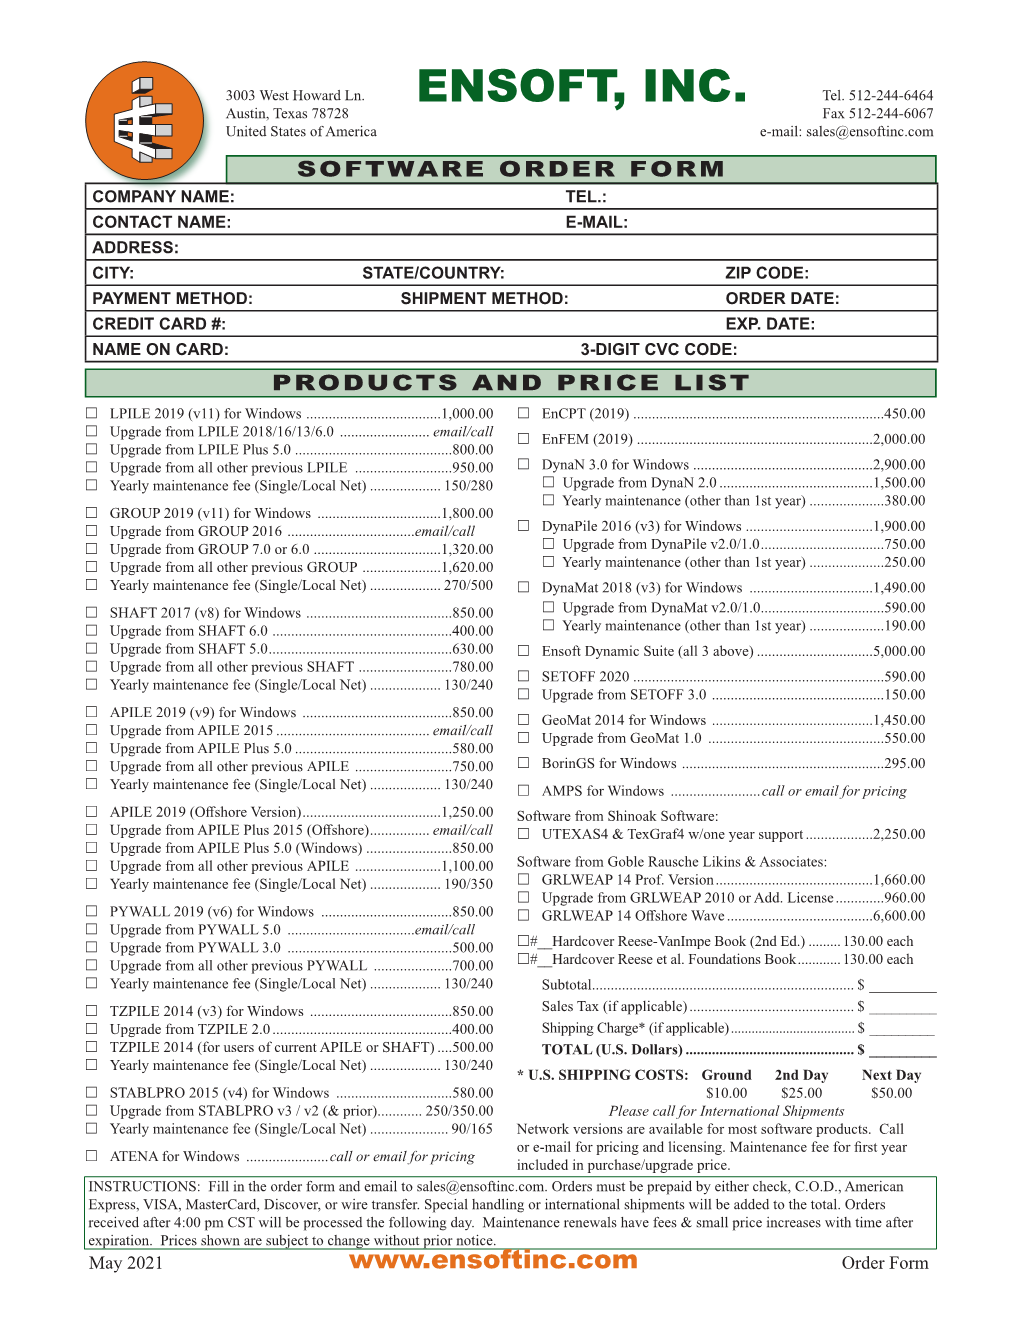 View Pricing Catalog